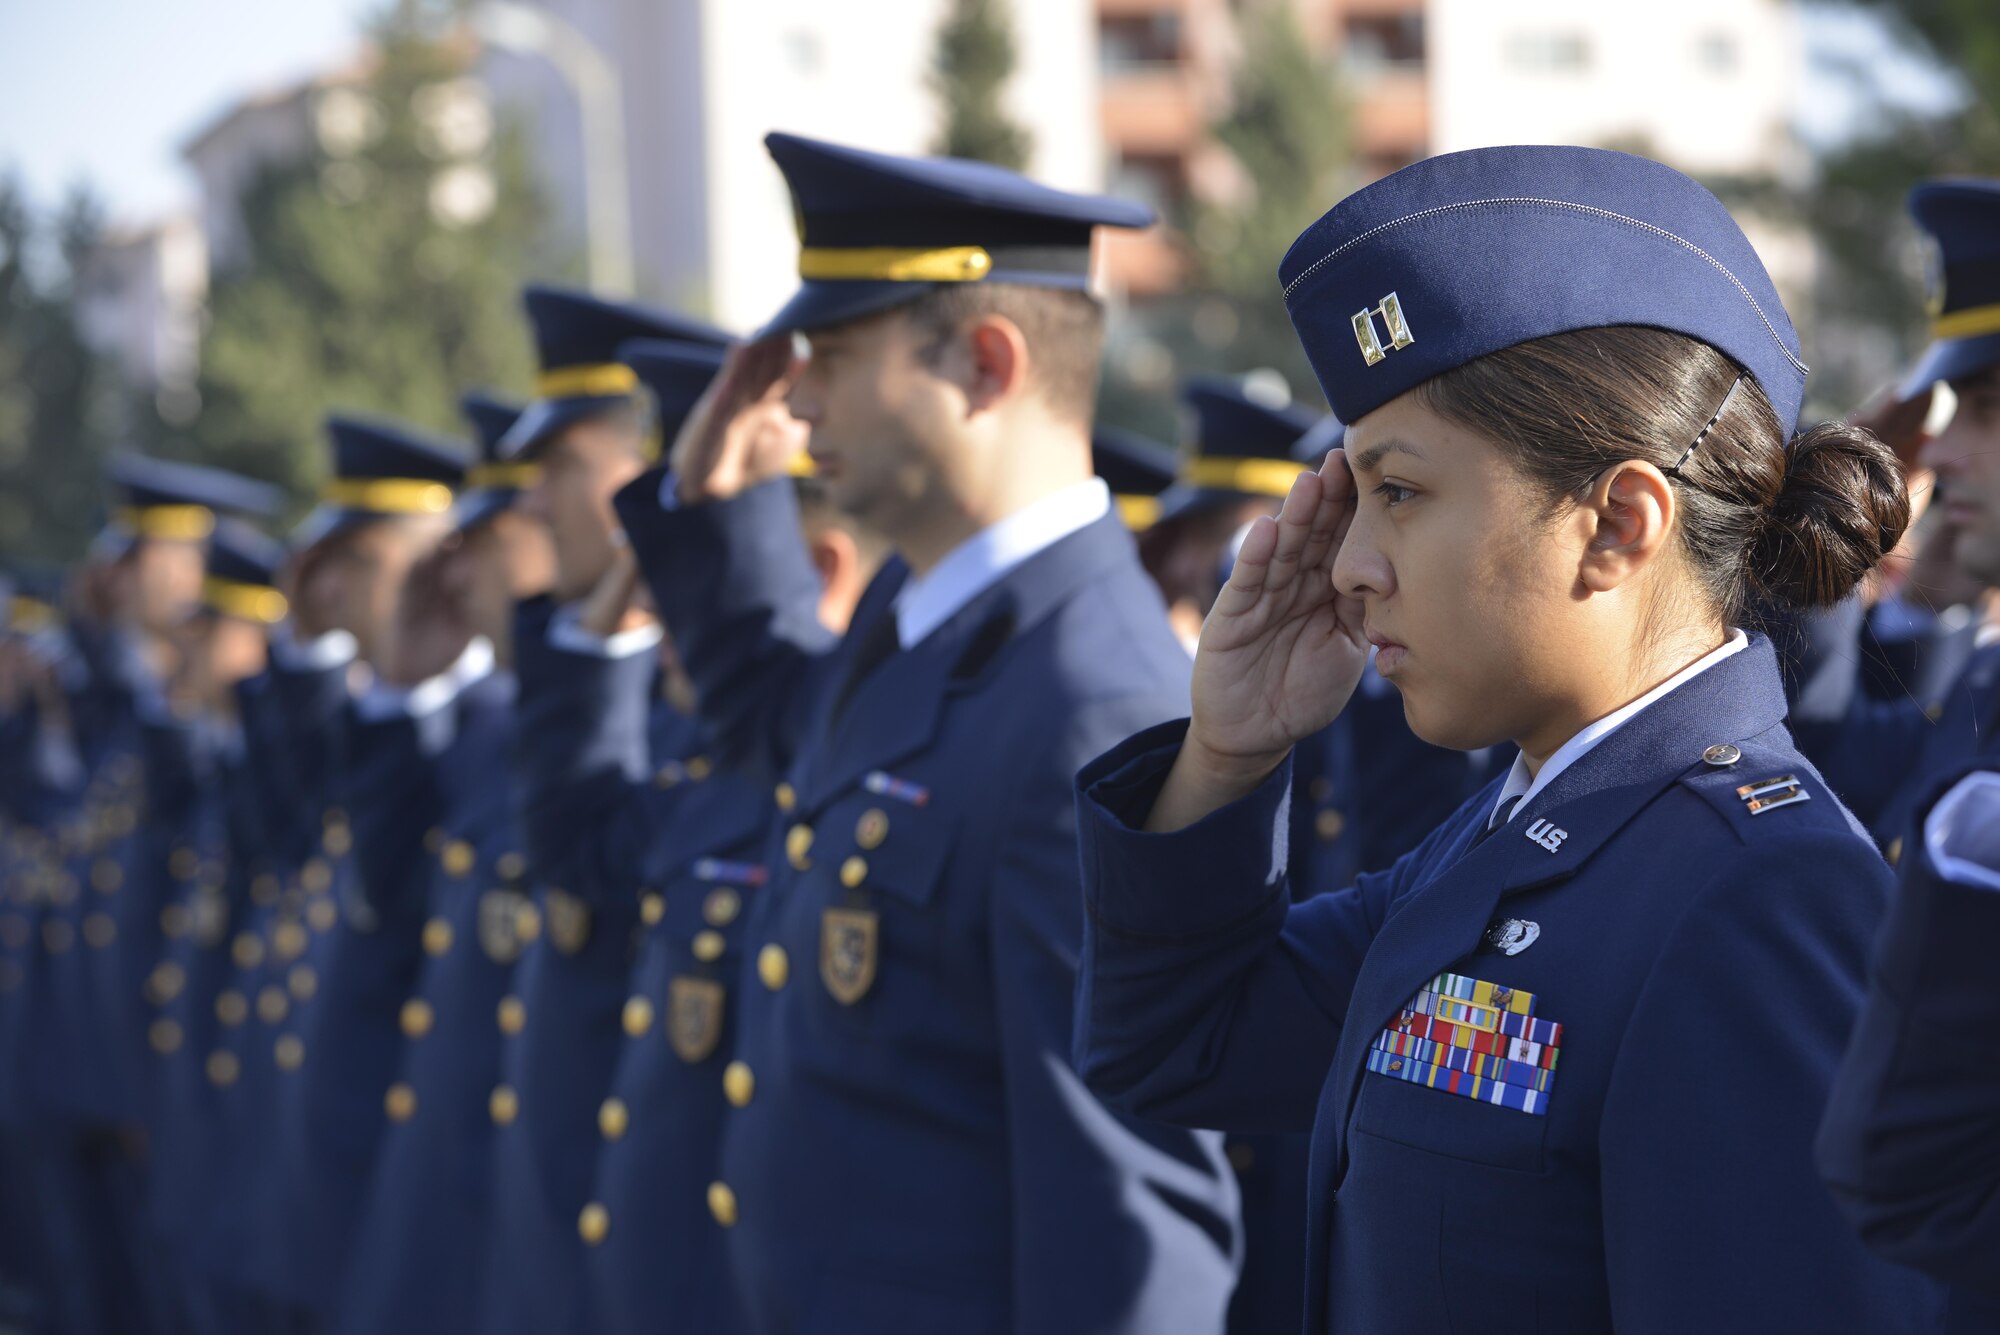 U.S. Air Force Capt. Claire Carlos, 39th Air Base Wing sexual assault response coordinator, along with 10th Tanker Base personnel, salute during a memorial ceremony for Mustafa Kemal Ataturk Nov. 10, 2016, at Incirlik Air Base, Turkey. U.S. and Turkish service members gathered to pay respect and honor Ataturk. (U.S. Air Force photo by Senior Airman John Nieves Camacho)